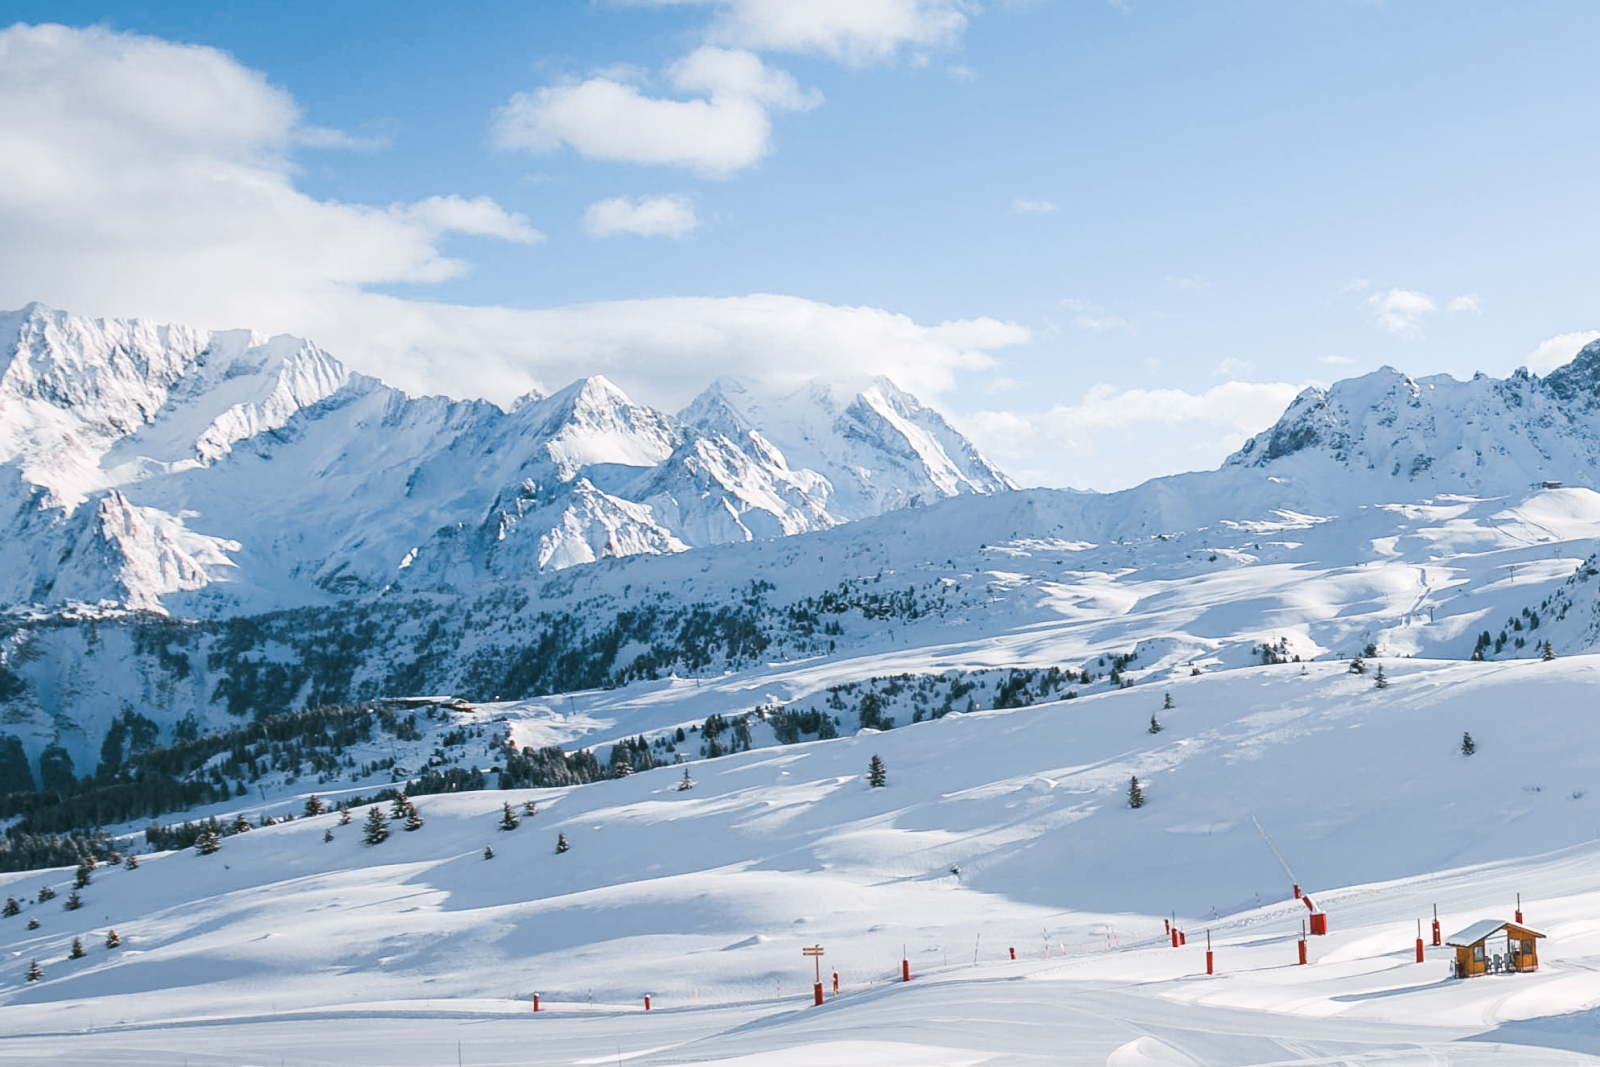 Top 5 Snow Sure Ski Resorts to Visit for the Easter Holidays!